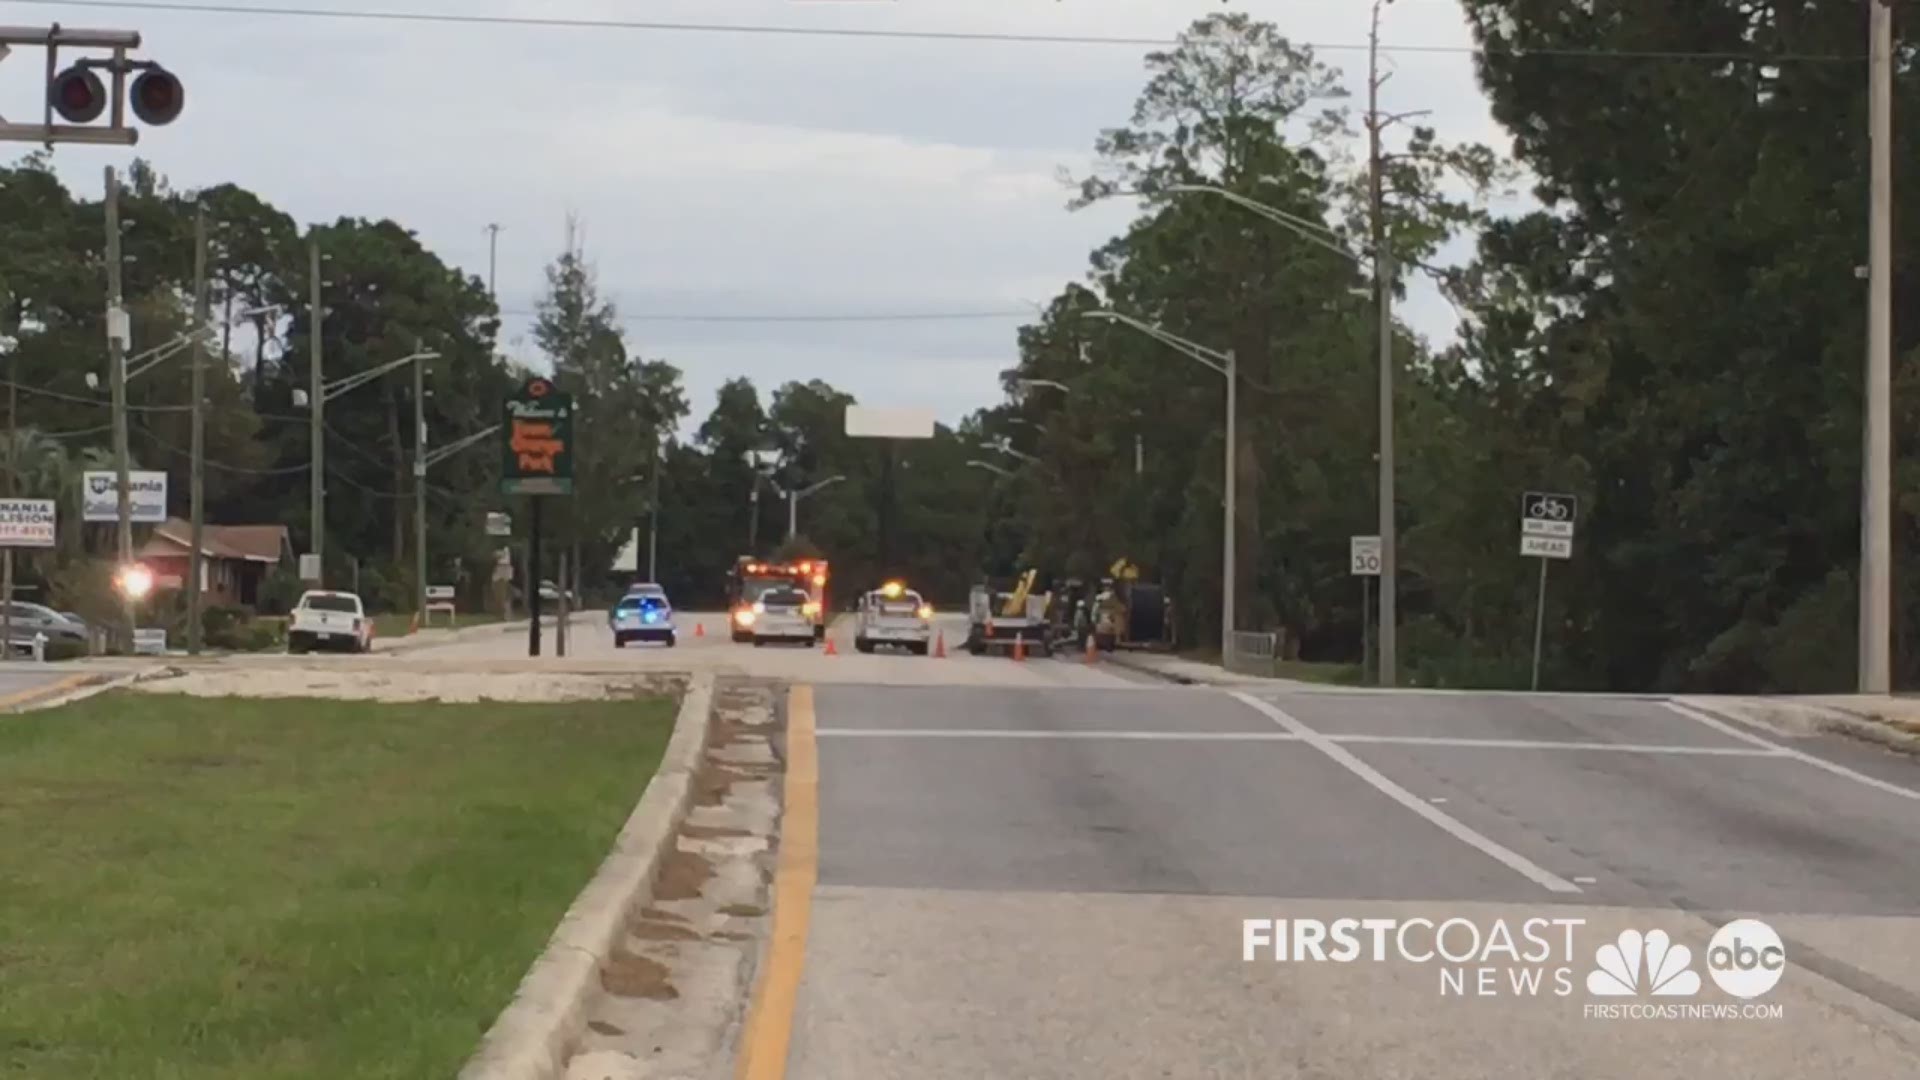 Drivers are urged to seek an alternate route after a gas leak shuts down Wells Road in Orange Park.